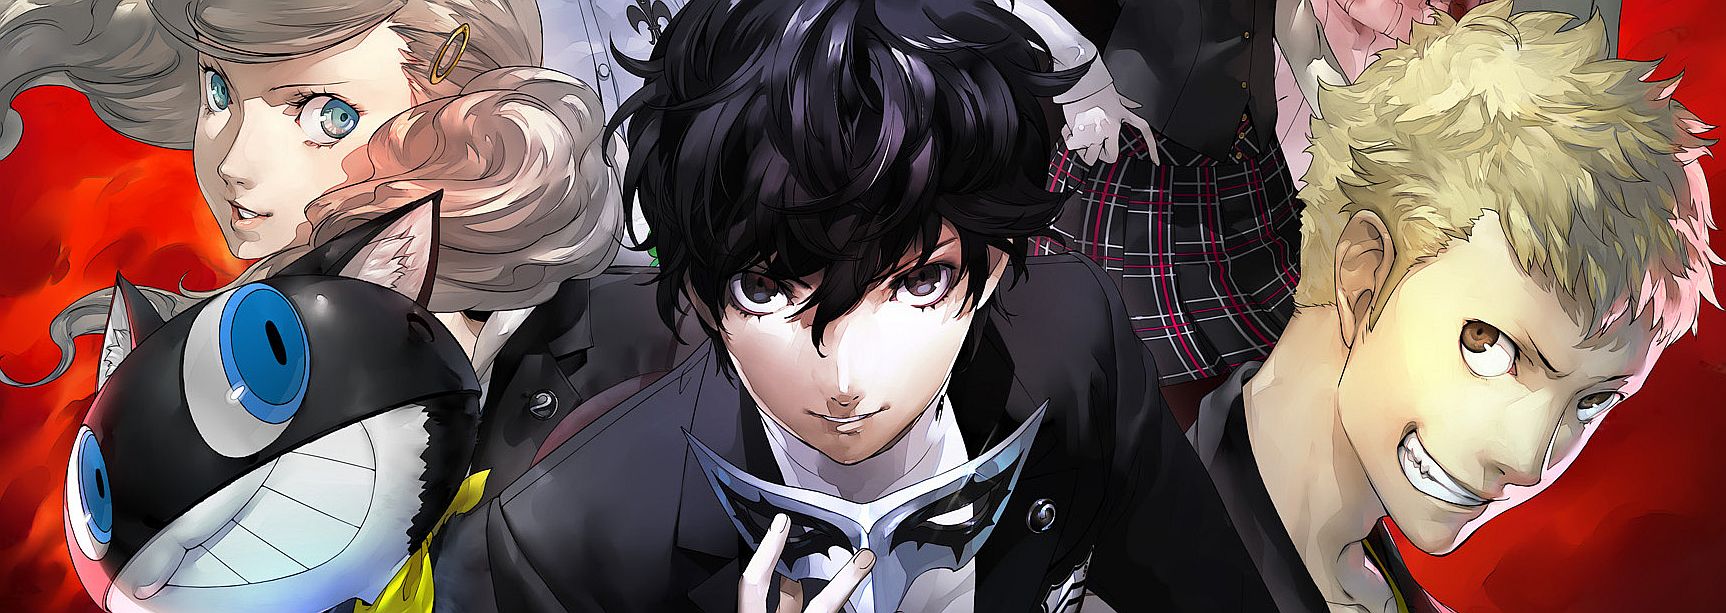 Image for Joker from Persona 5 is coming to Super Smash Bros. Ultimate